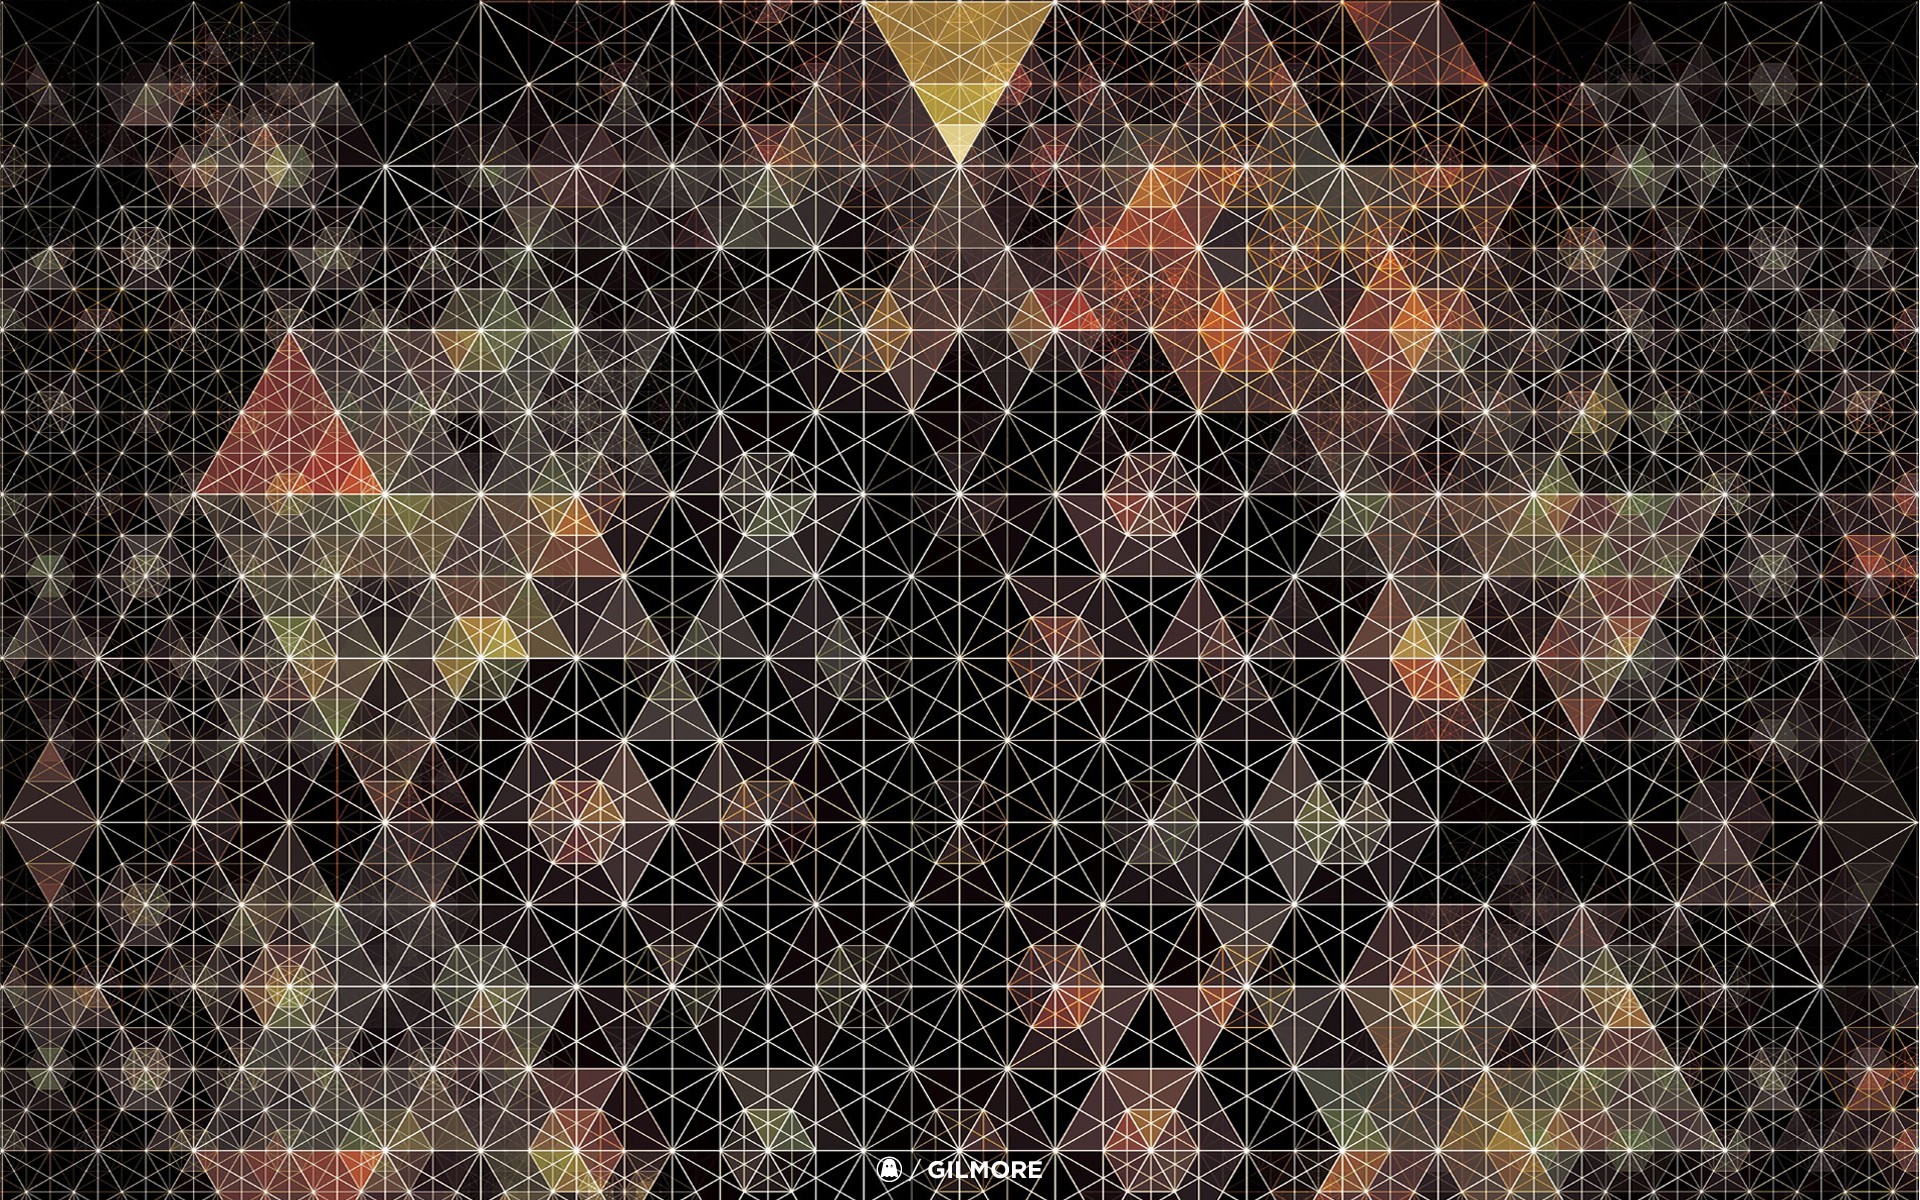 General 1920x1200 Andy Gilmore abstract geometry pattern